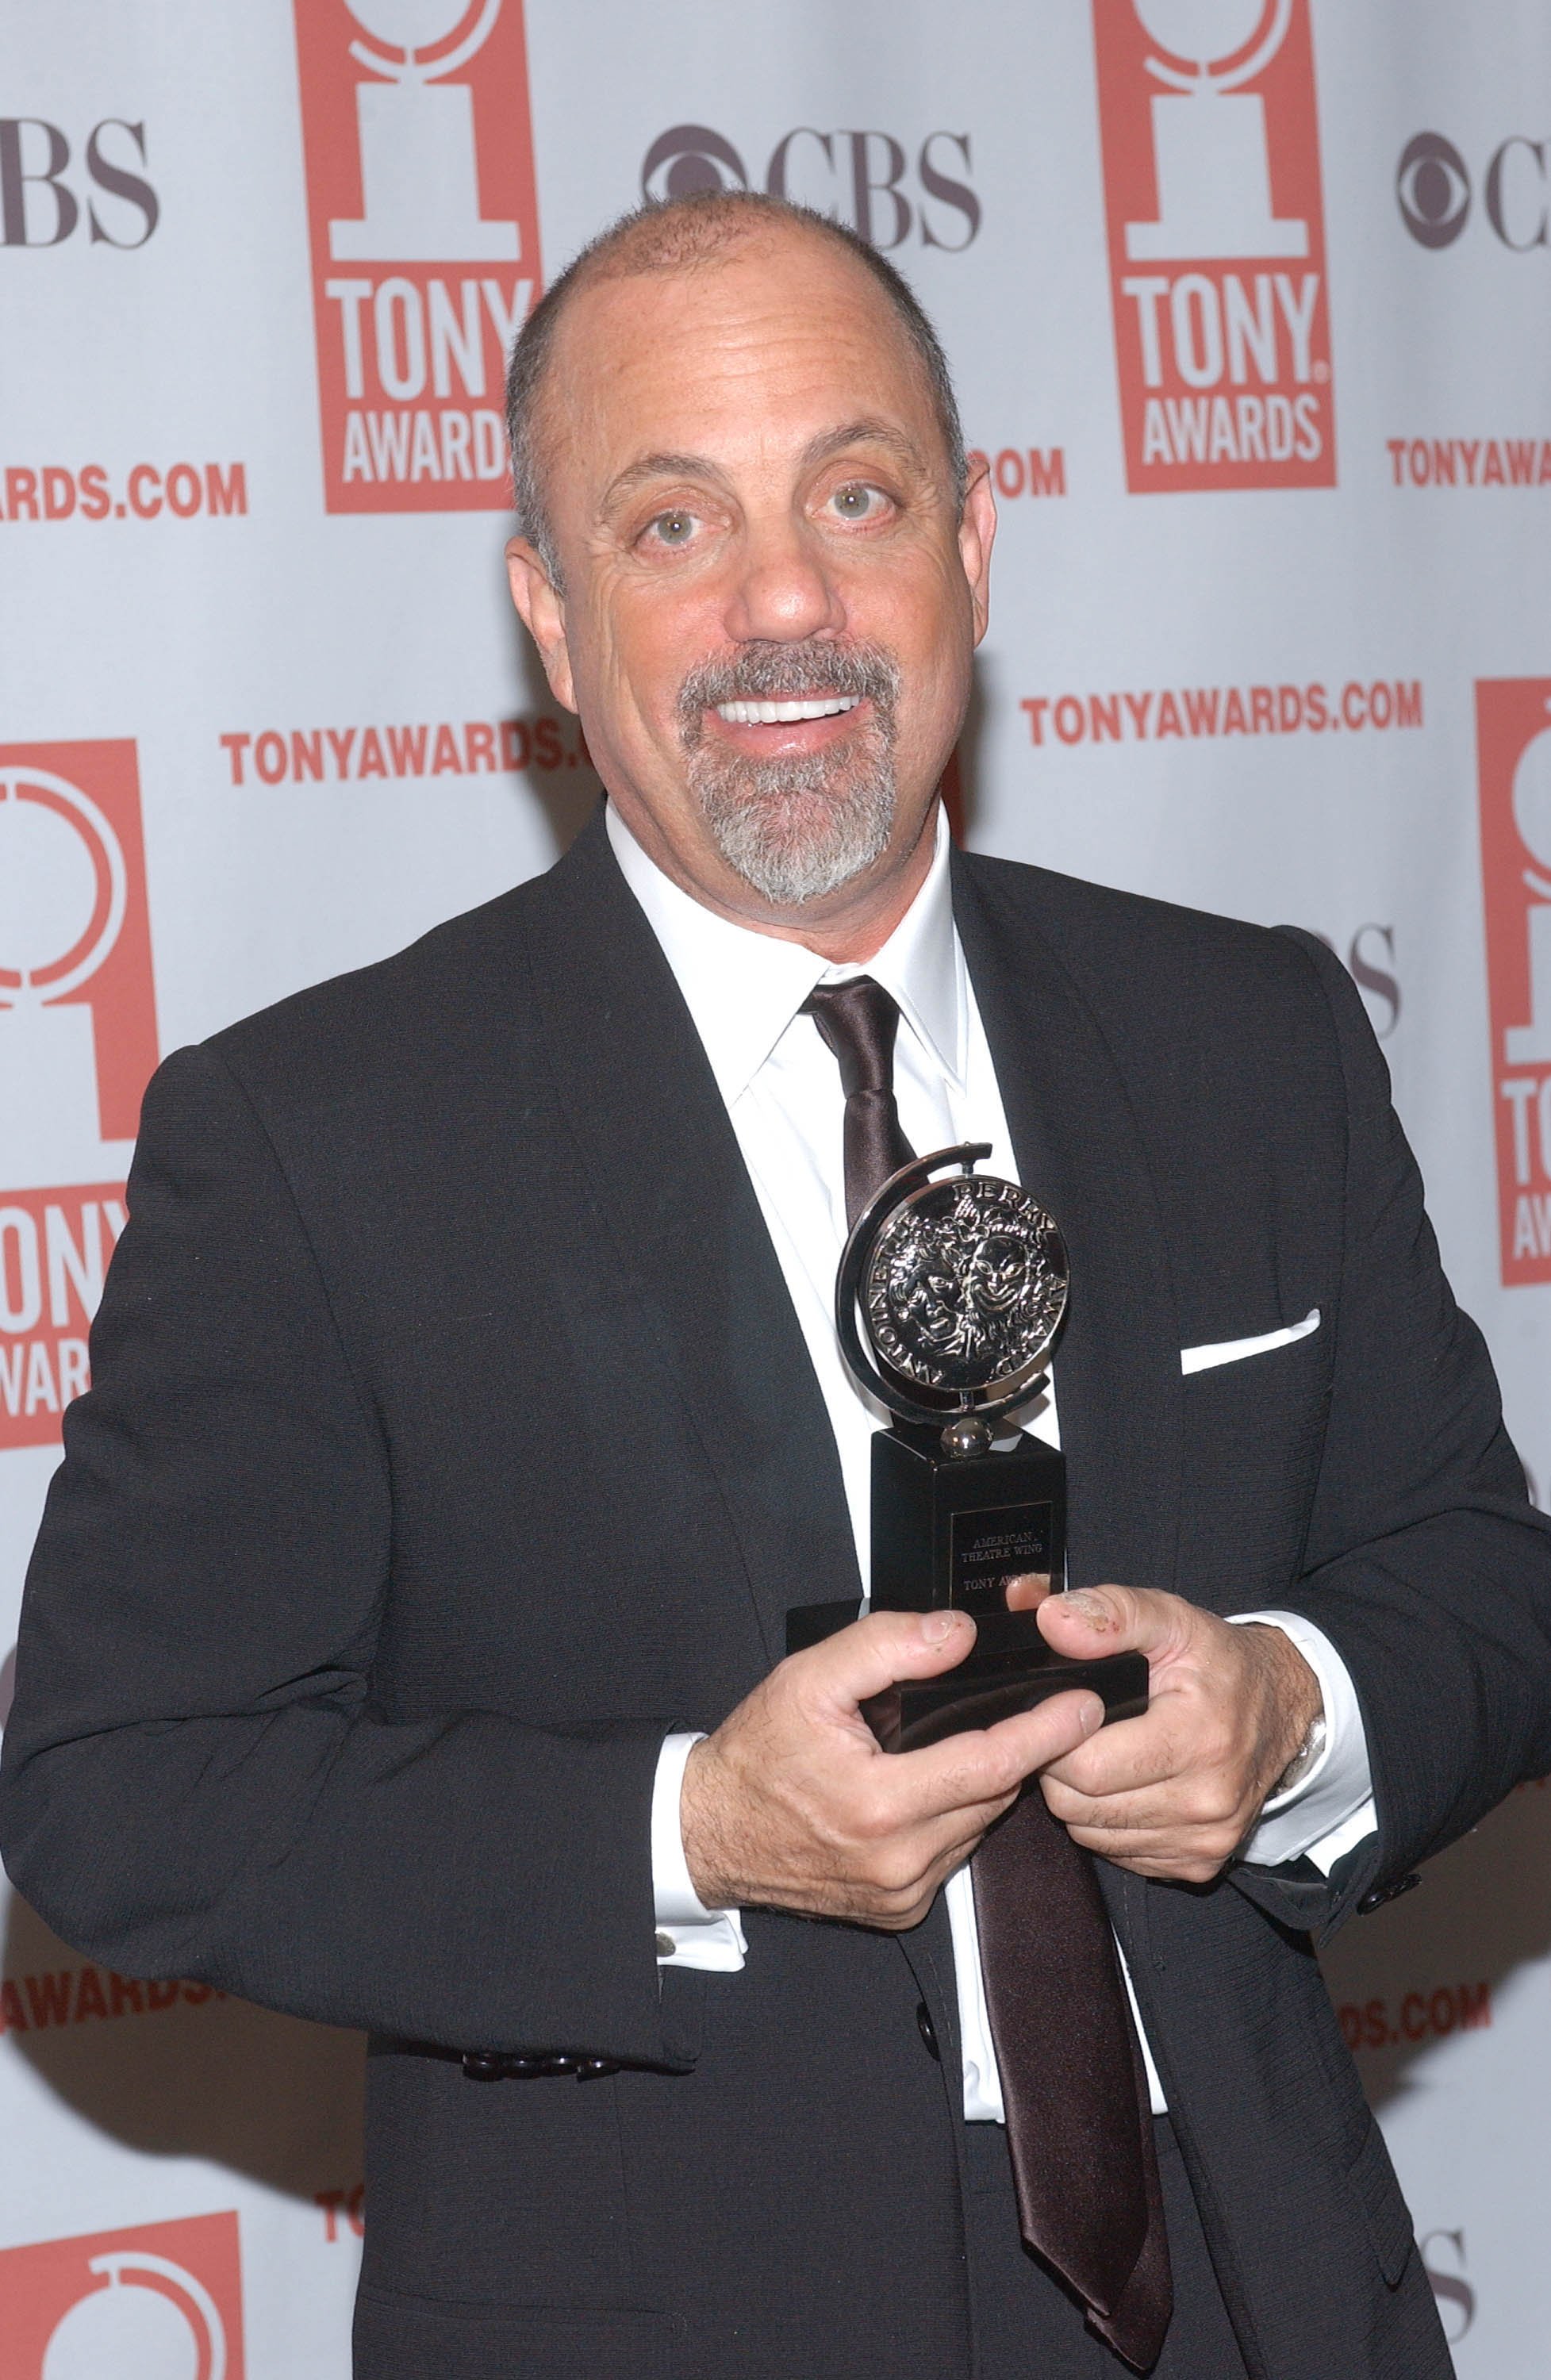 Rock and pop singer Billy Joel holding his award for winner of Best Orchestrations, "Movin Out"  at the Tony Awards in 2003. / Source: Getty Images